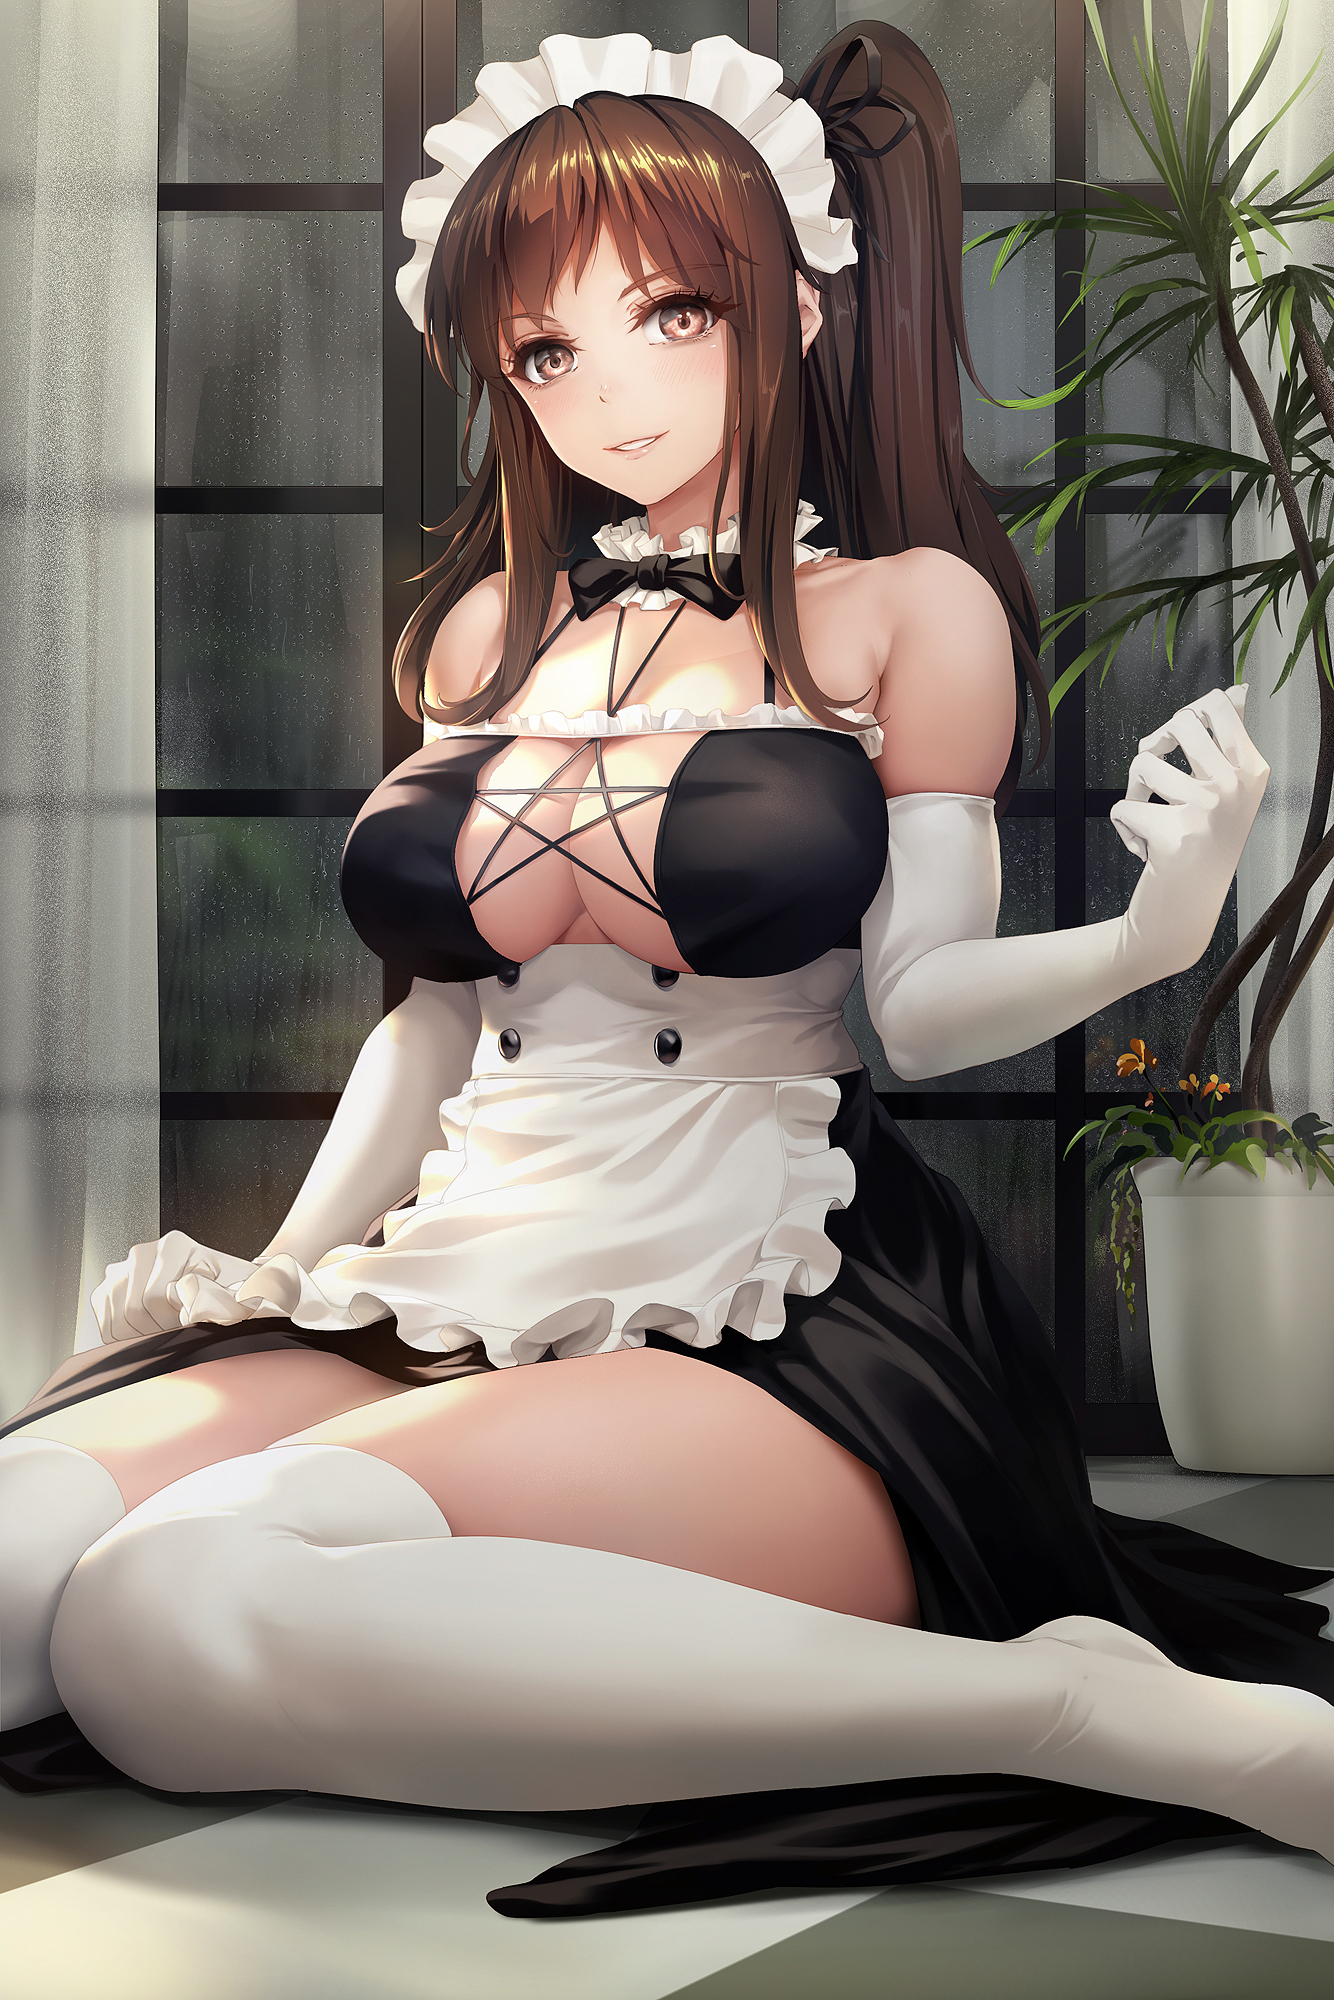 Anime 1334x2000 anime girls maid maid outfit brunette French maid cleavage big boobs satin gloves white thigh highs thigh-highs